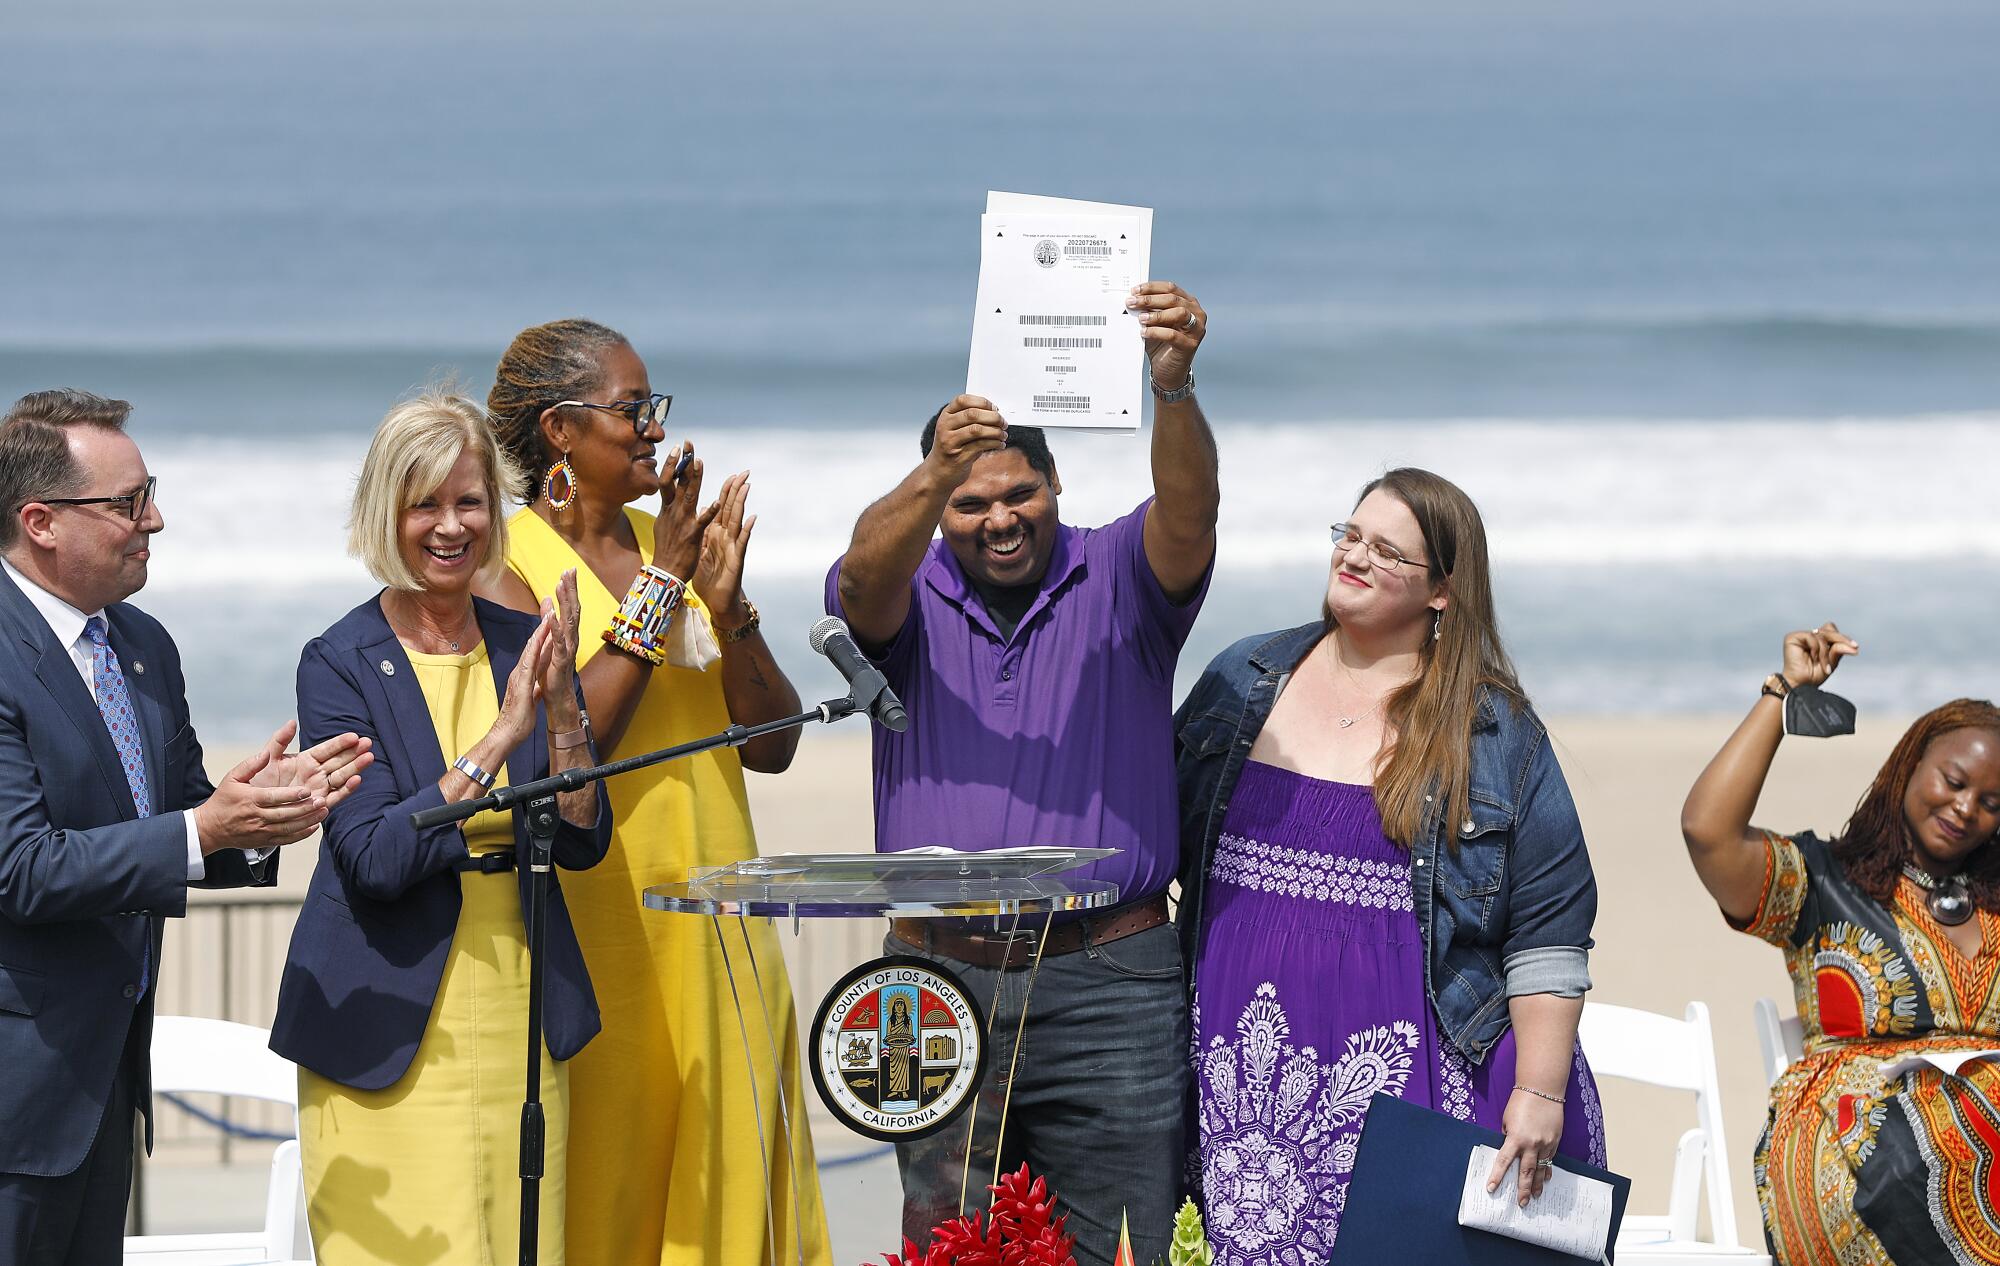 A man at the center holds up document while people on his left and right applaud. A beach and sea are behind them.